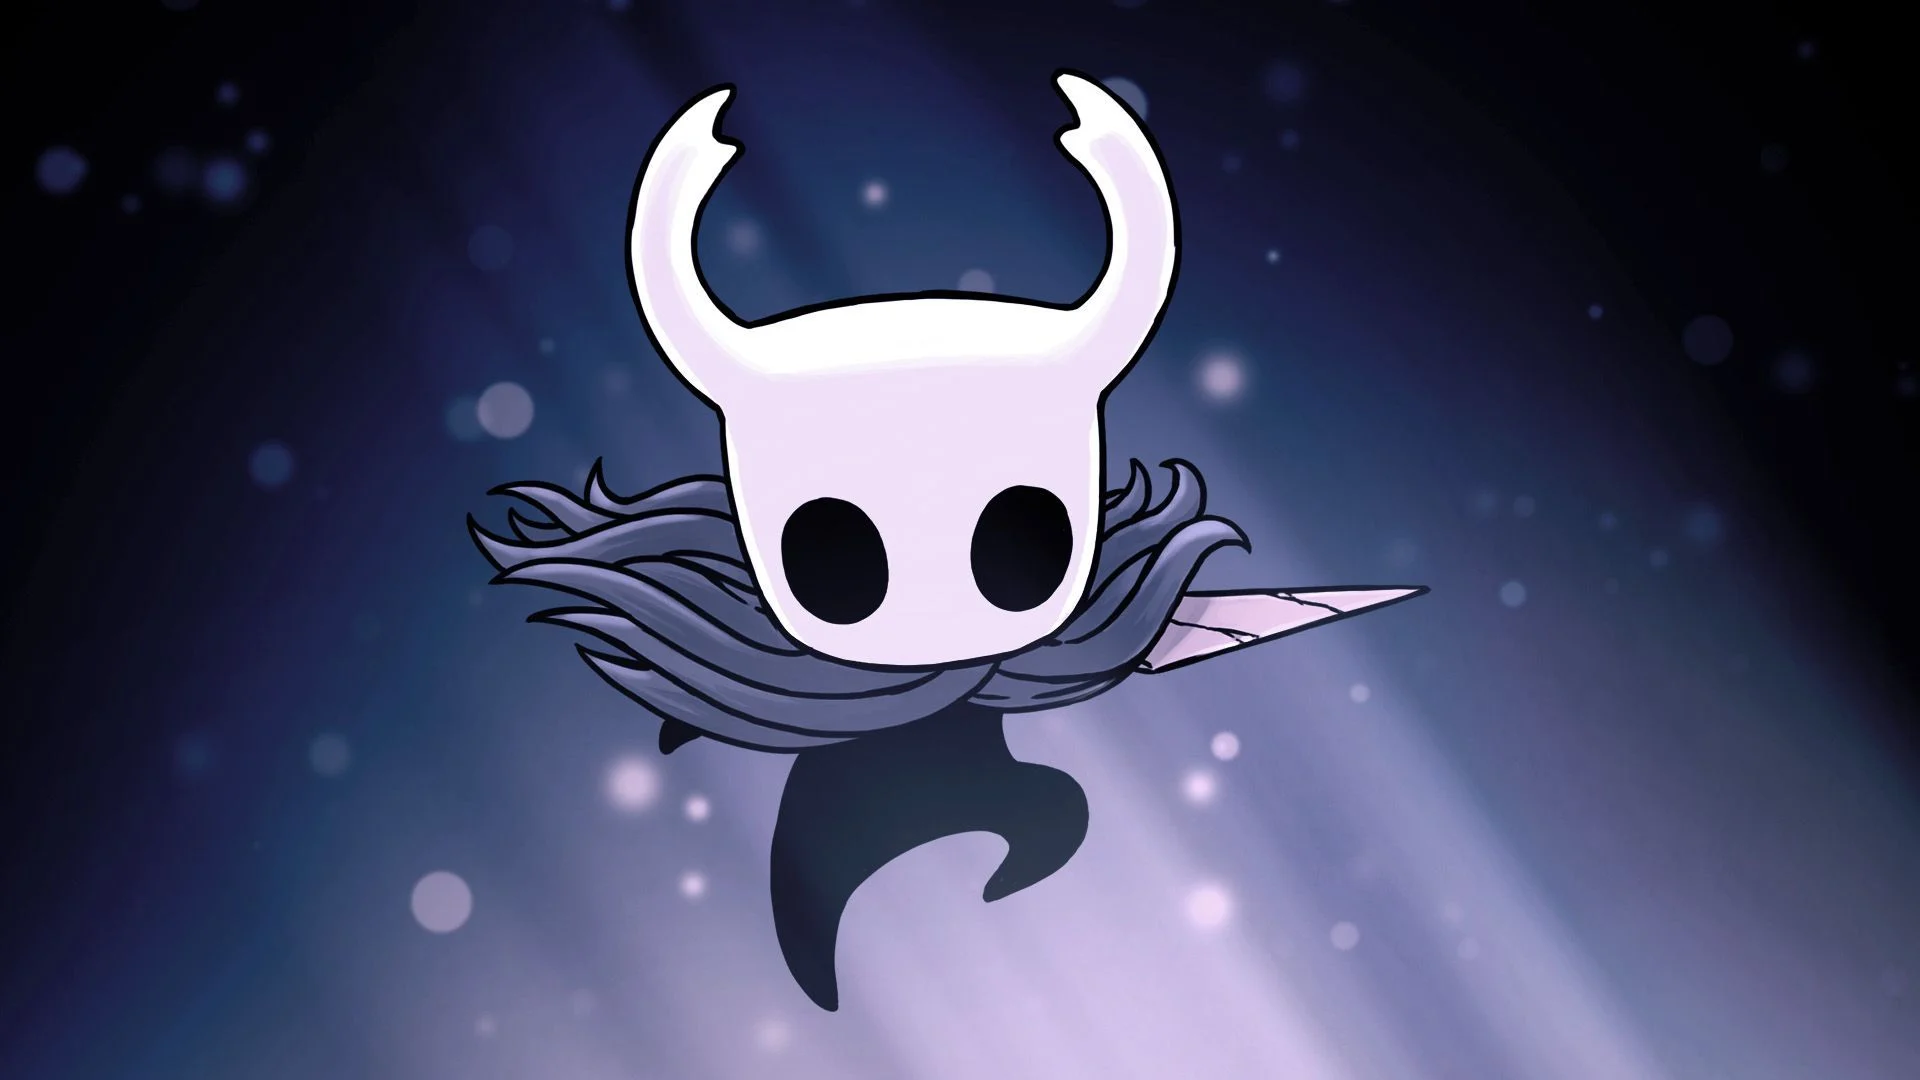 Forever Young Hollow Knight - Hollow Knight has updated its peak online on Steam